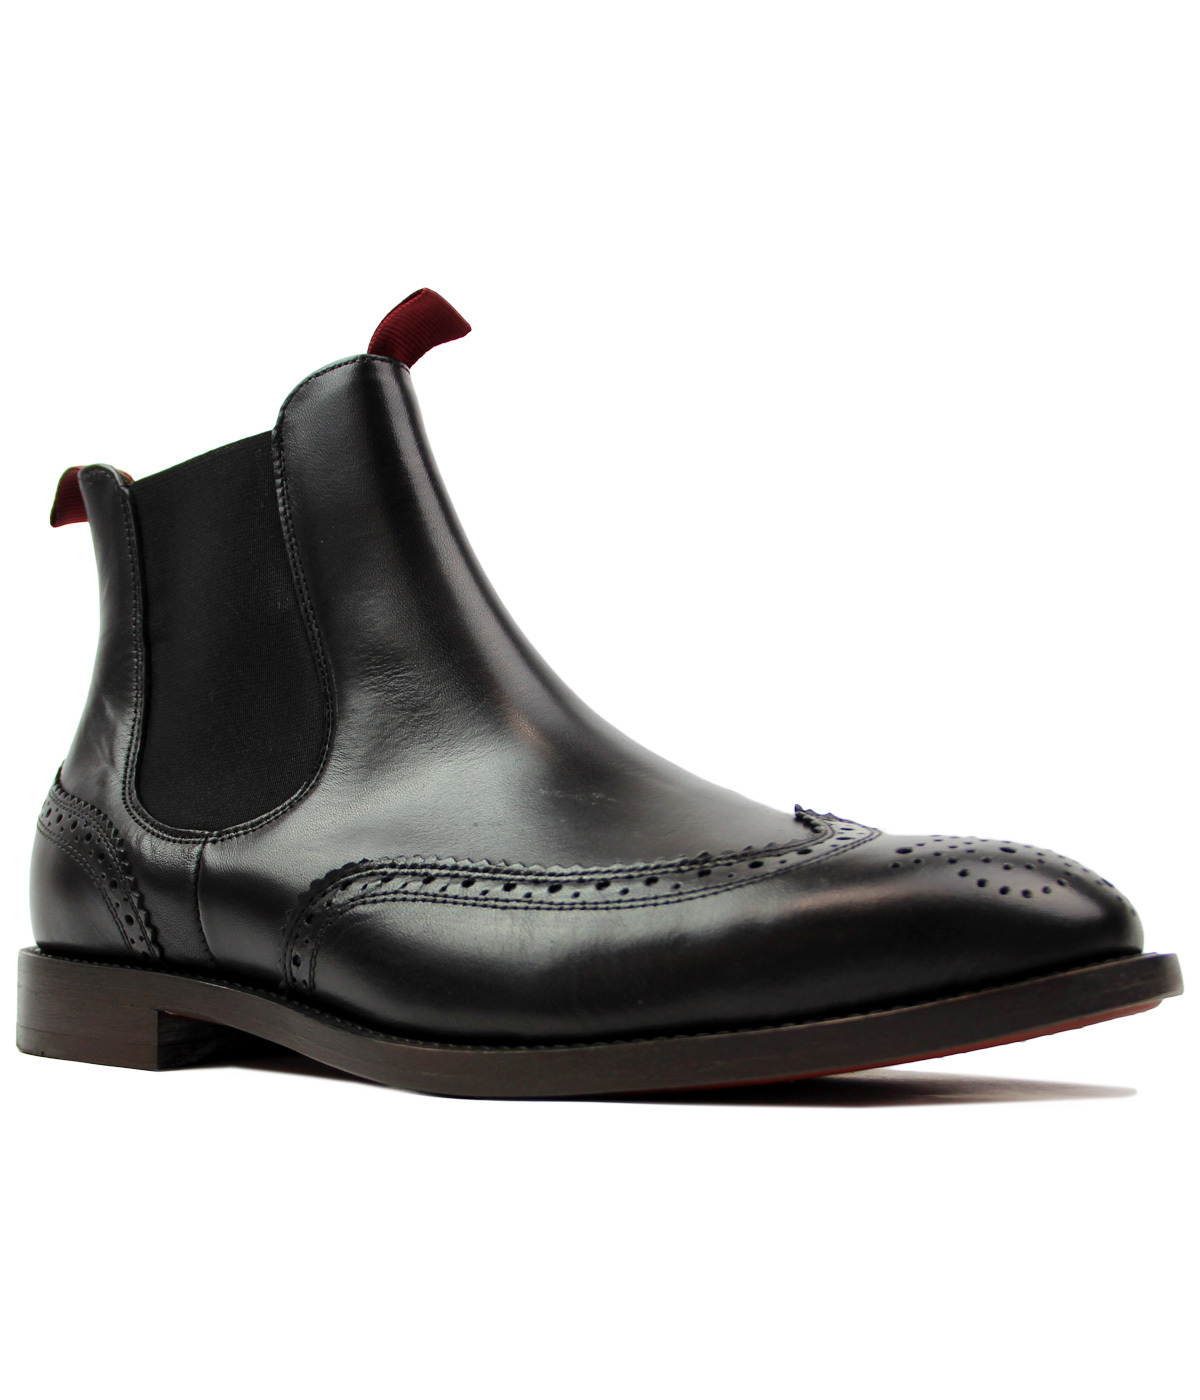 H BY HUDSON Breslin Retro Mod Brogue Chelsea Boots in Black